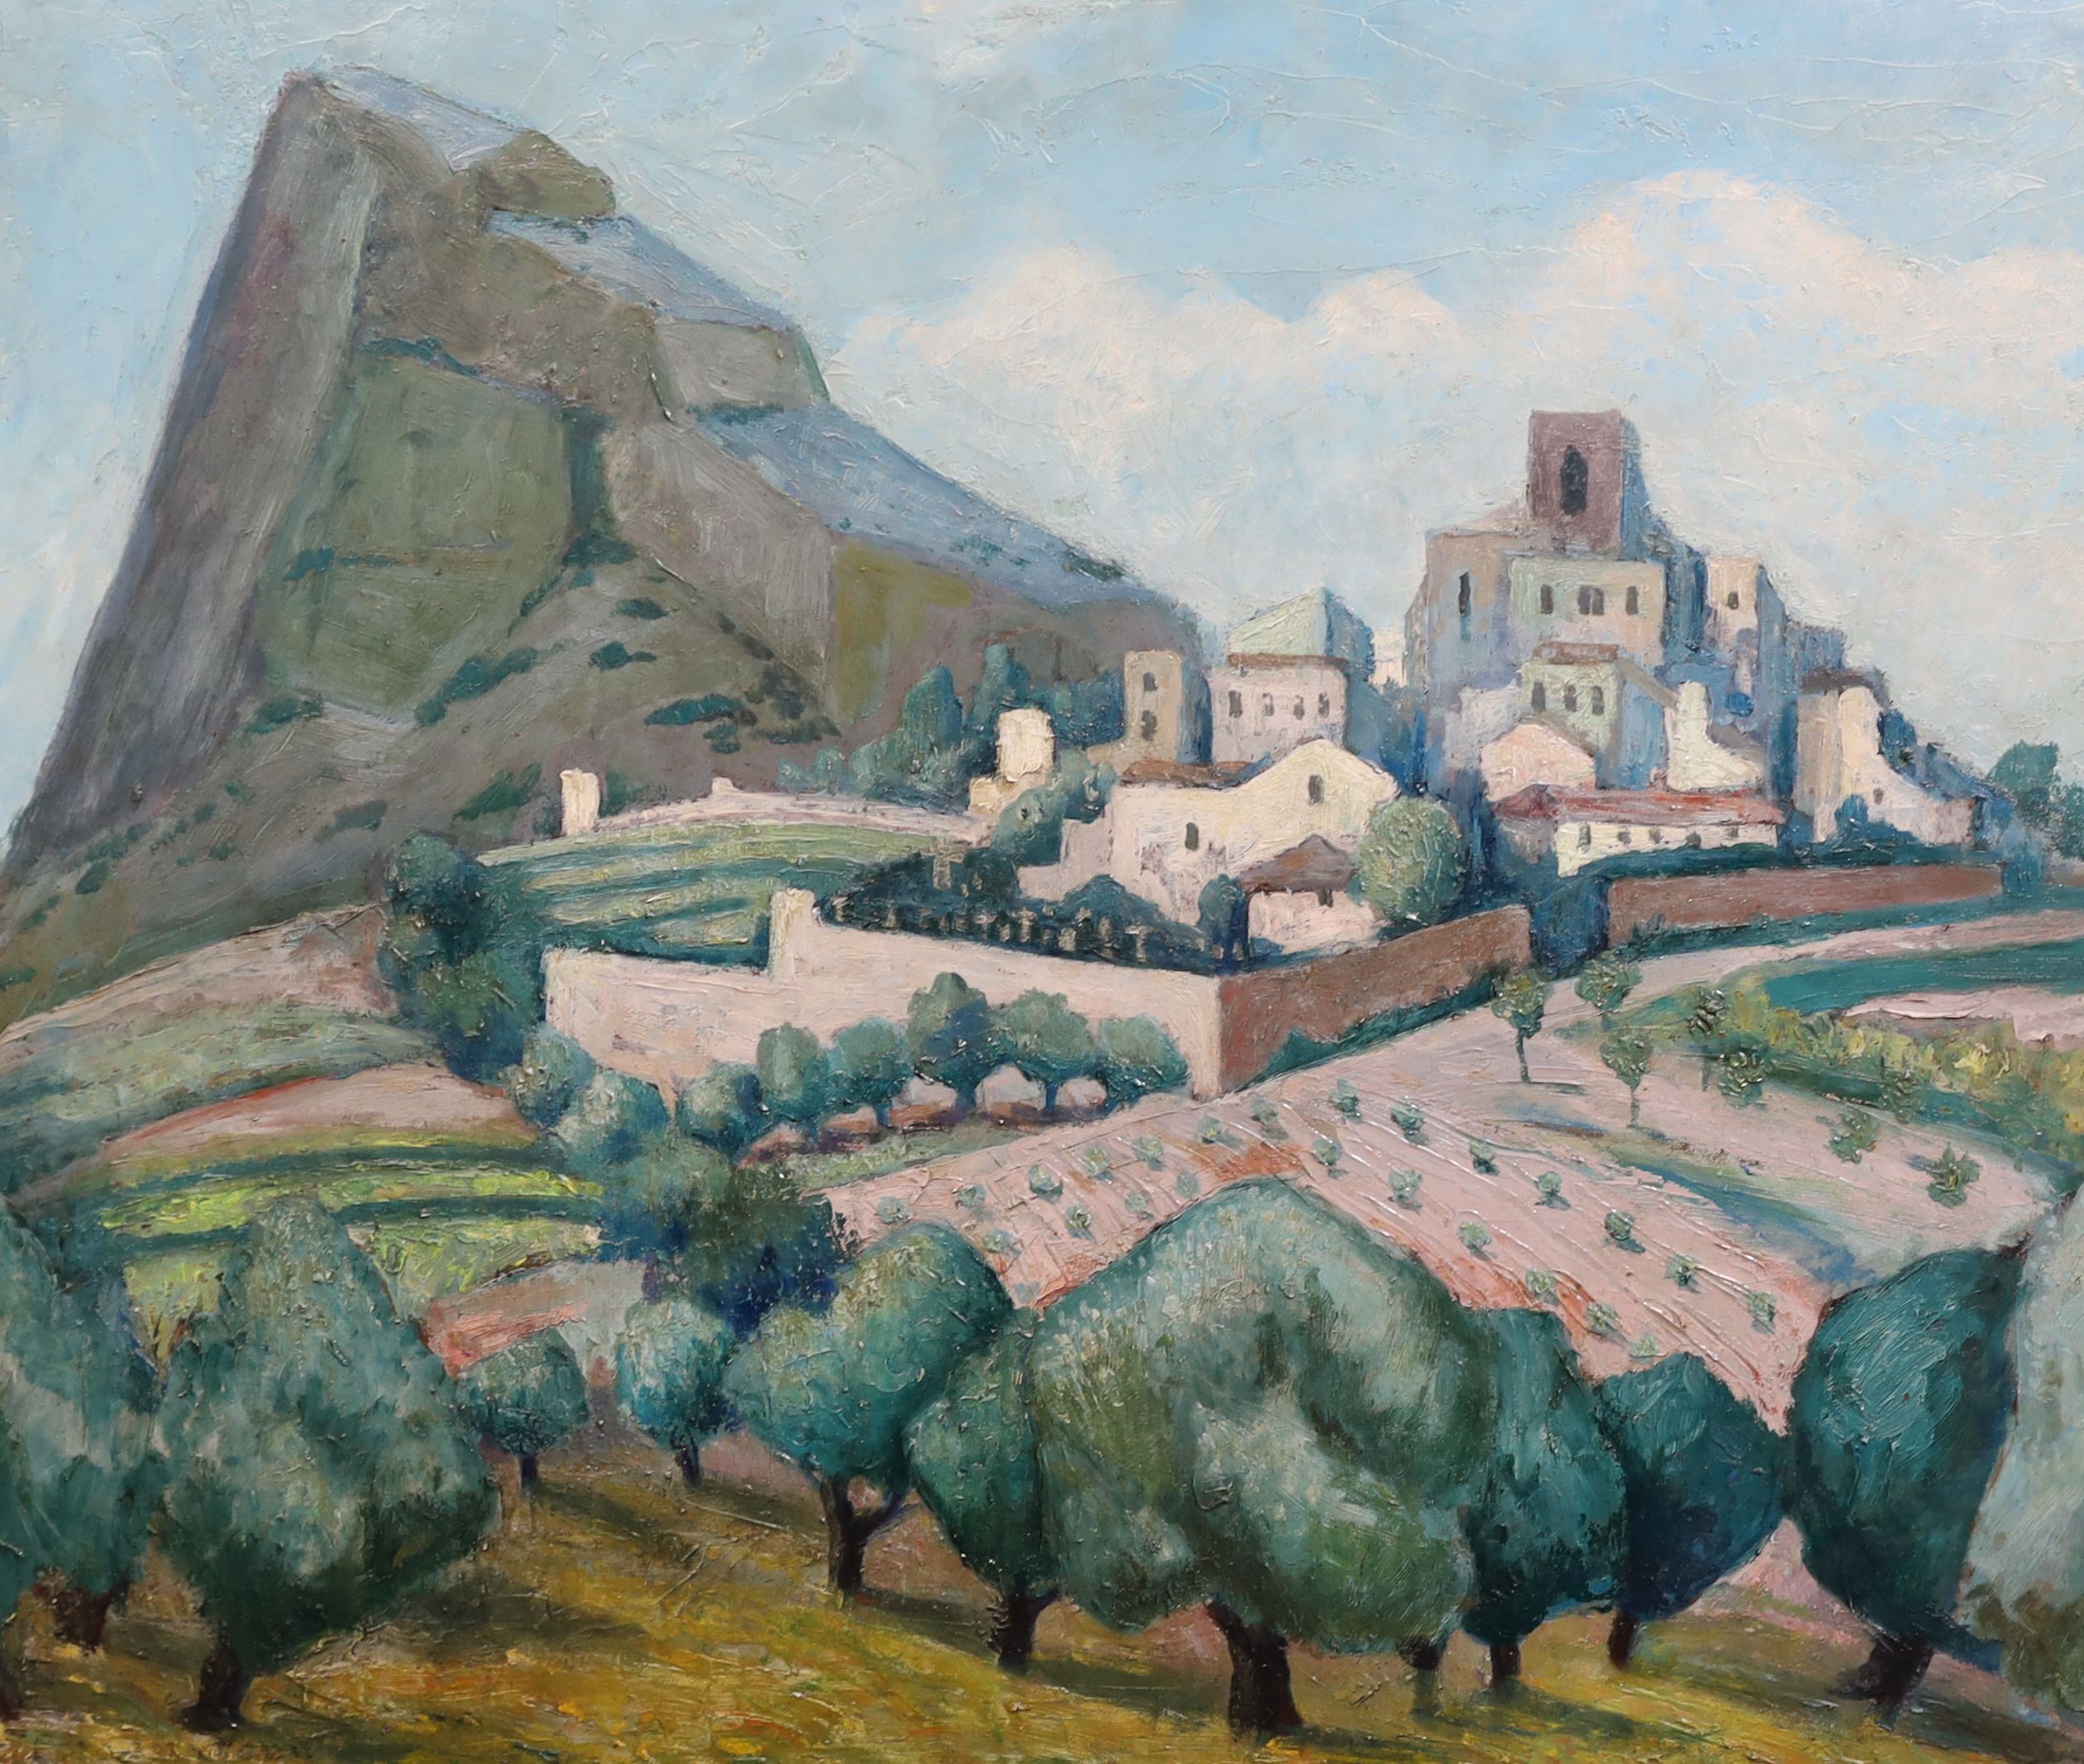 Attributed to Adrian Paul Allinson (1890-1959), Southern French landscape with hilltop town, oil on board, 50.5 x 60.5cm. unframed